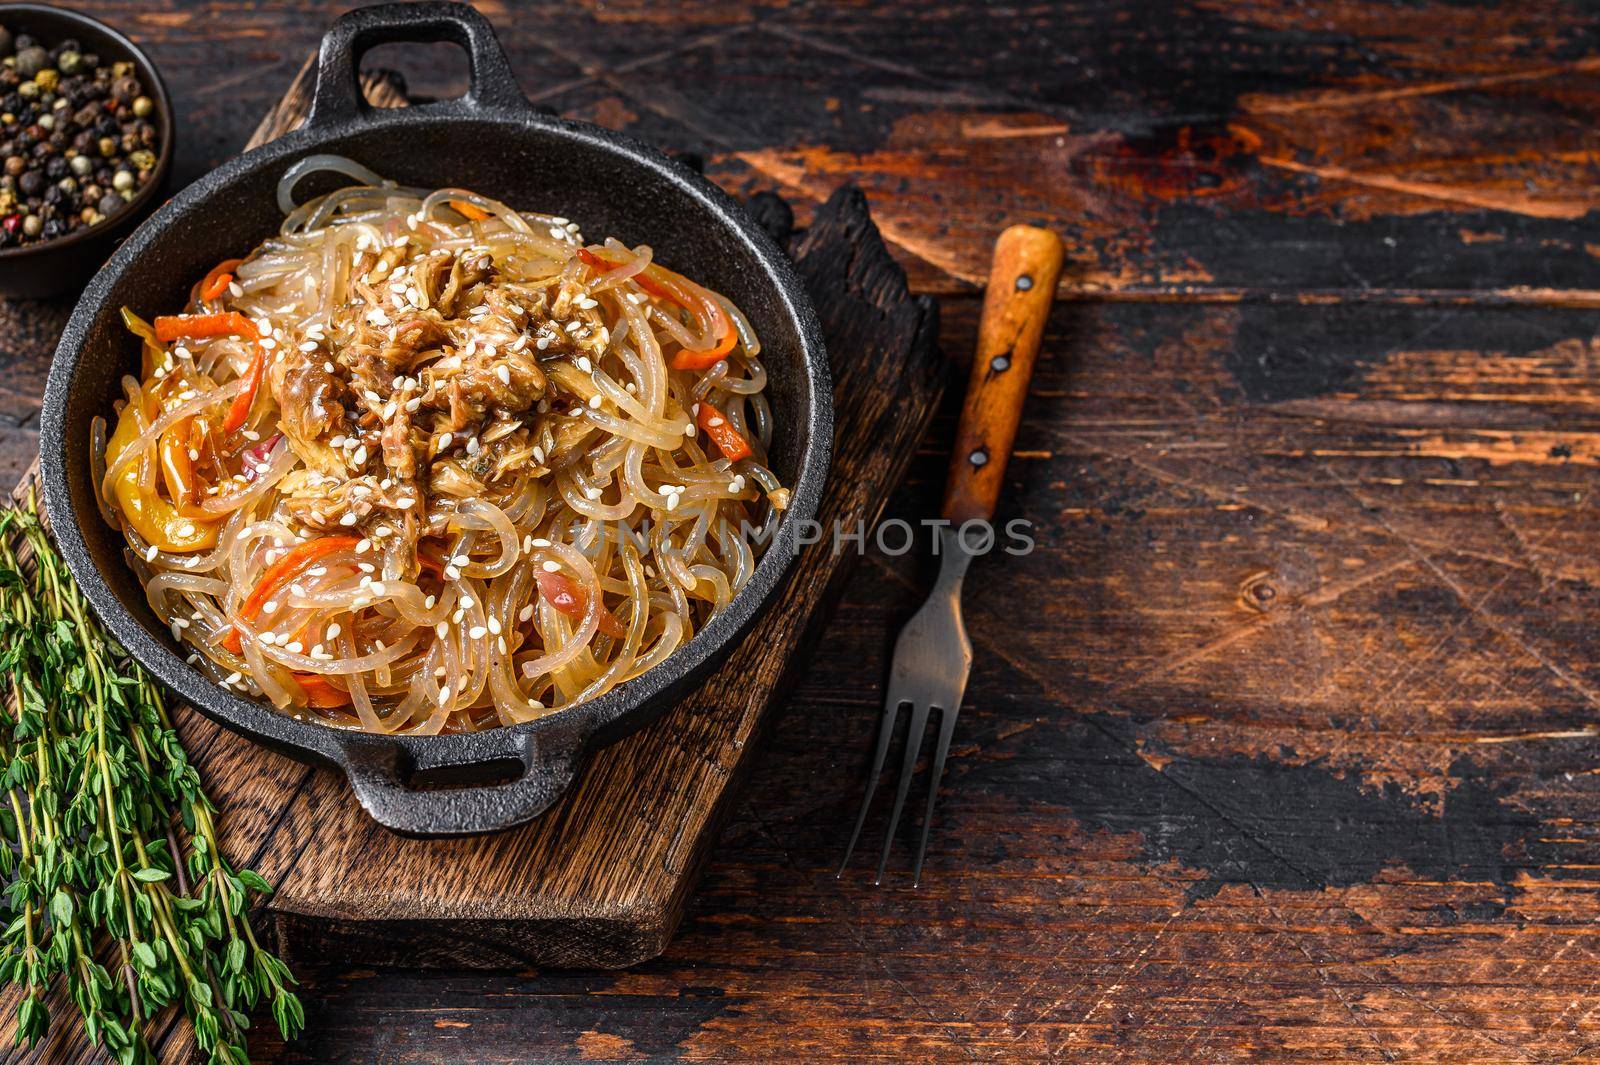 Soy glass noodles with shiitake mushrooms and chicken meat. Wooden background. Top view. Copy space by Composter